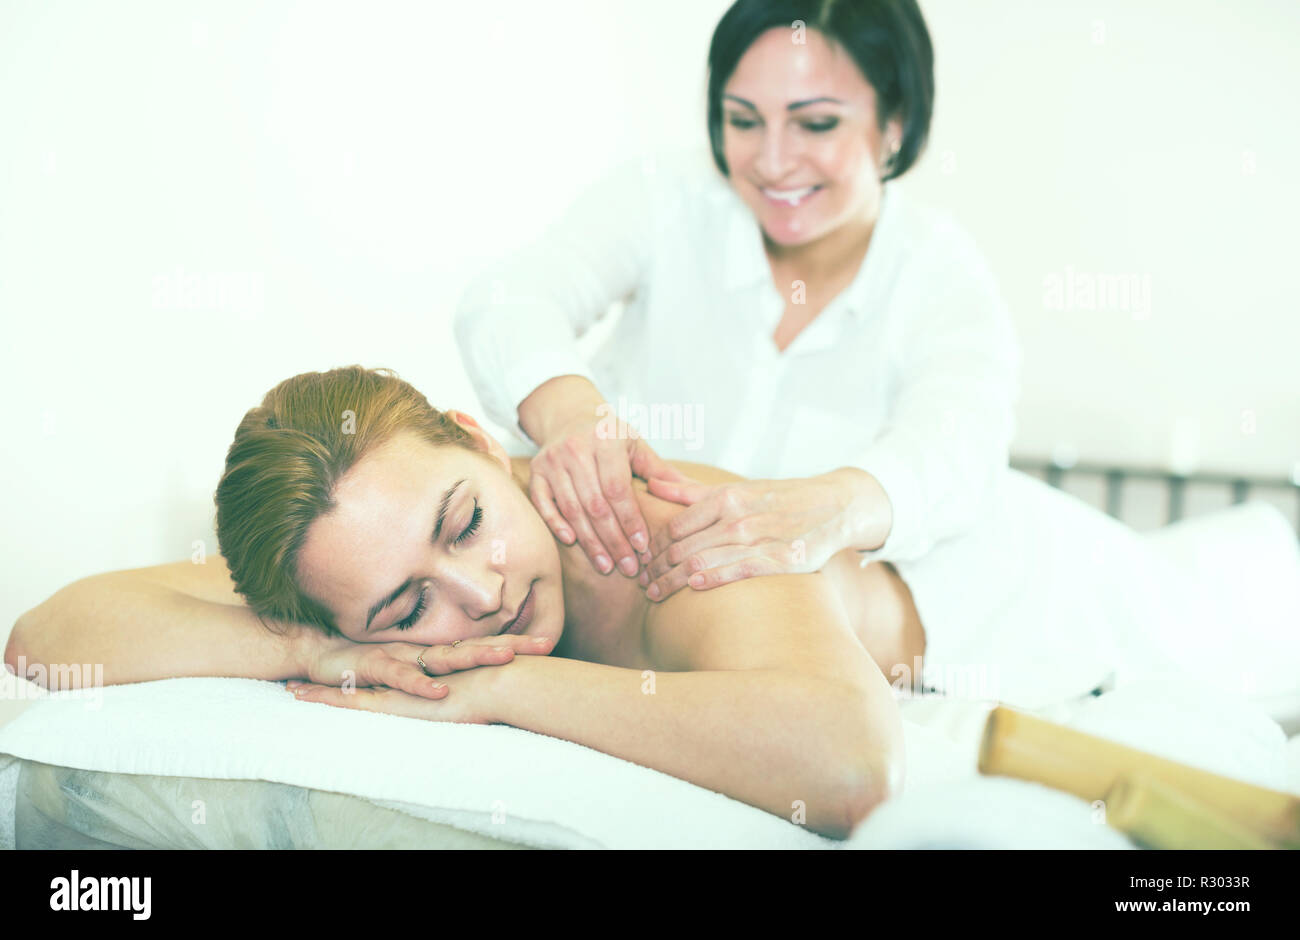 https://c8.alamy.com/comp/R3033R/adult-masseuse-massaging-shoulders-and-neck-of-young-woman-in-massage-salon-R3033R.jpg